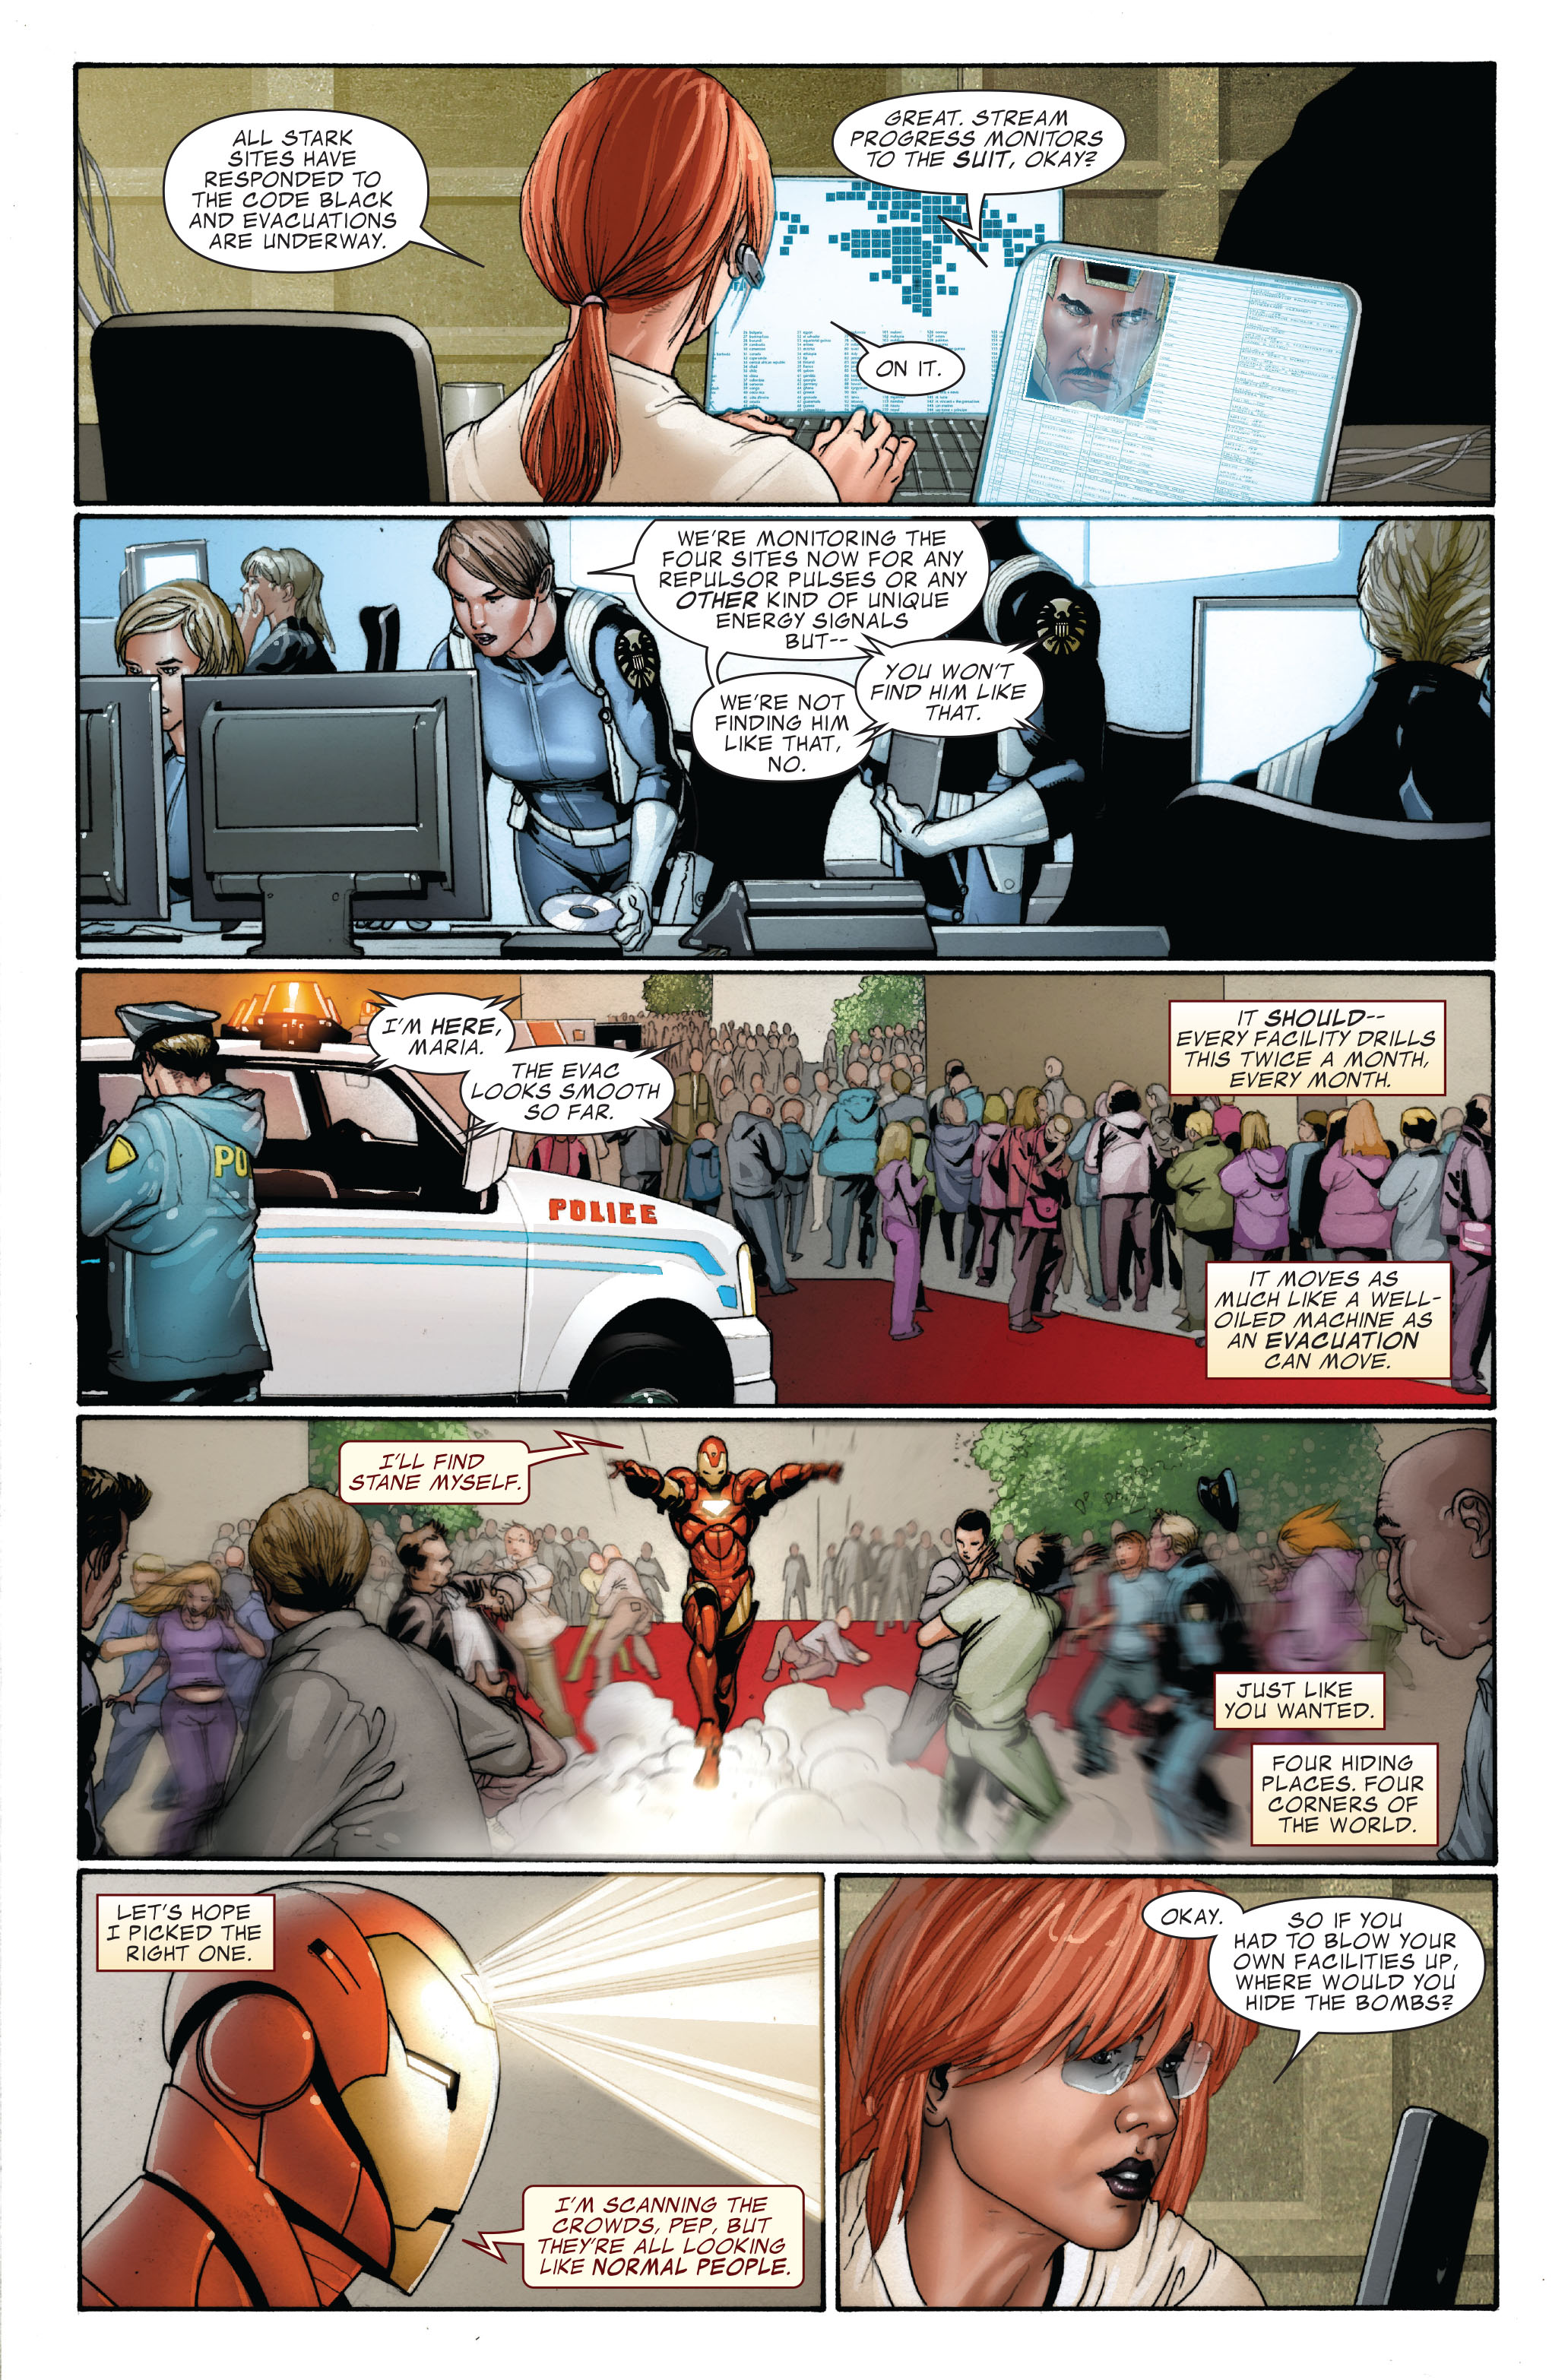 Invincible Iron Man (2008) 5 Page 7